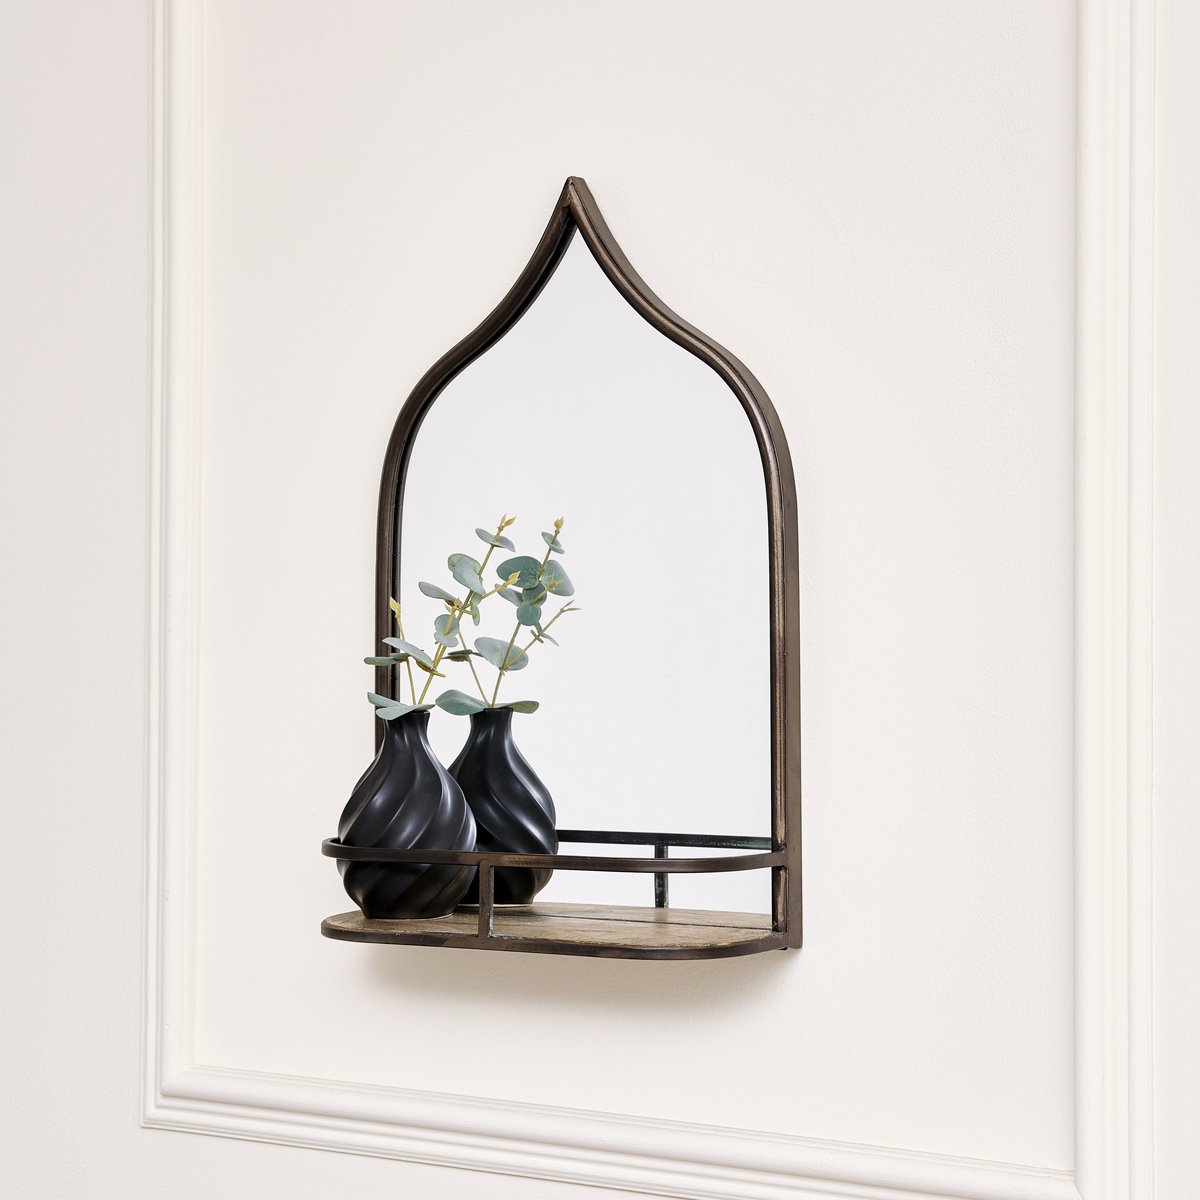 Rustic Metal Arched Mirrored With Gold Shelf - 48cm x 30cm